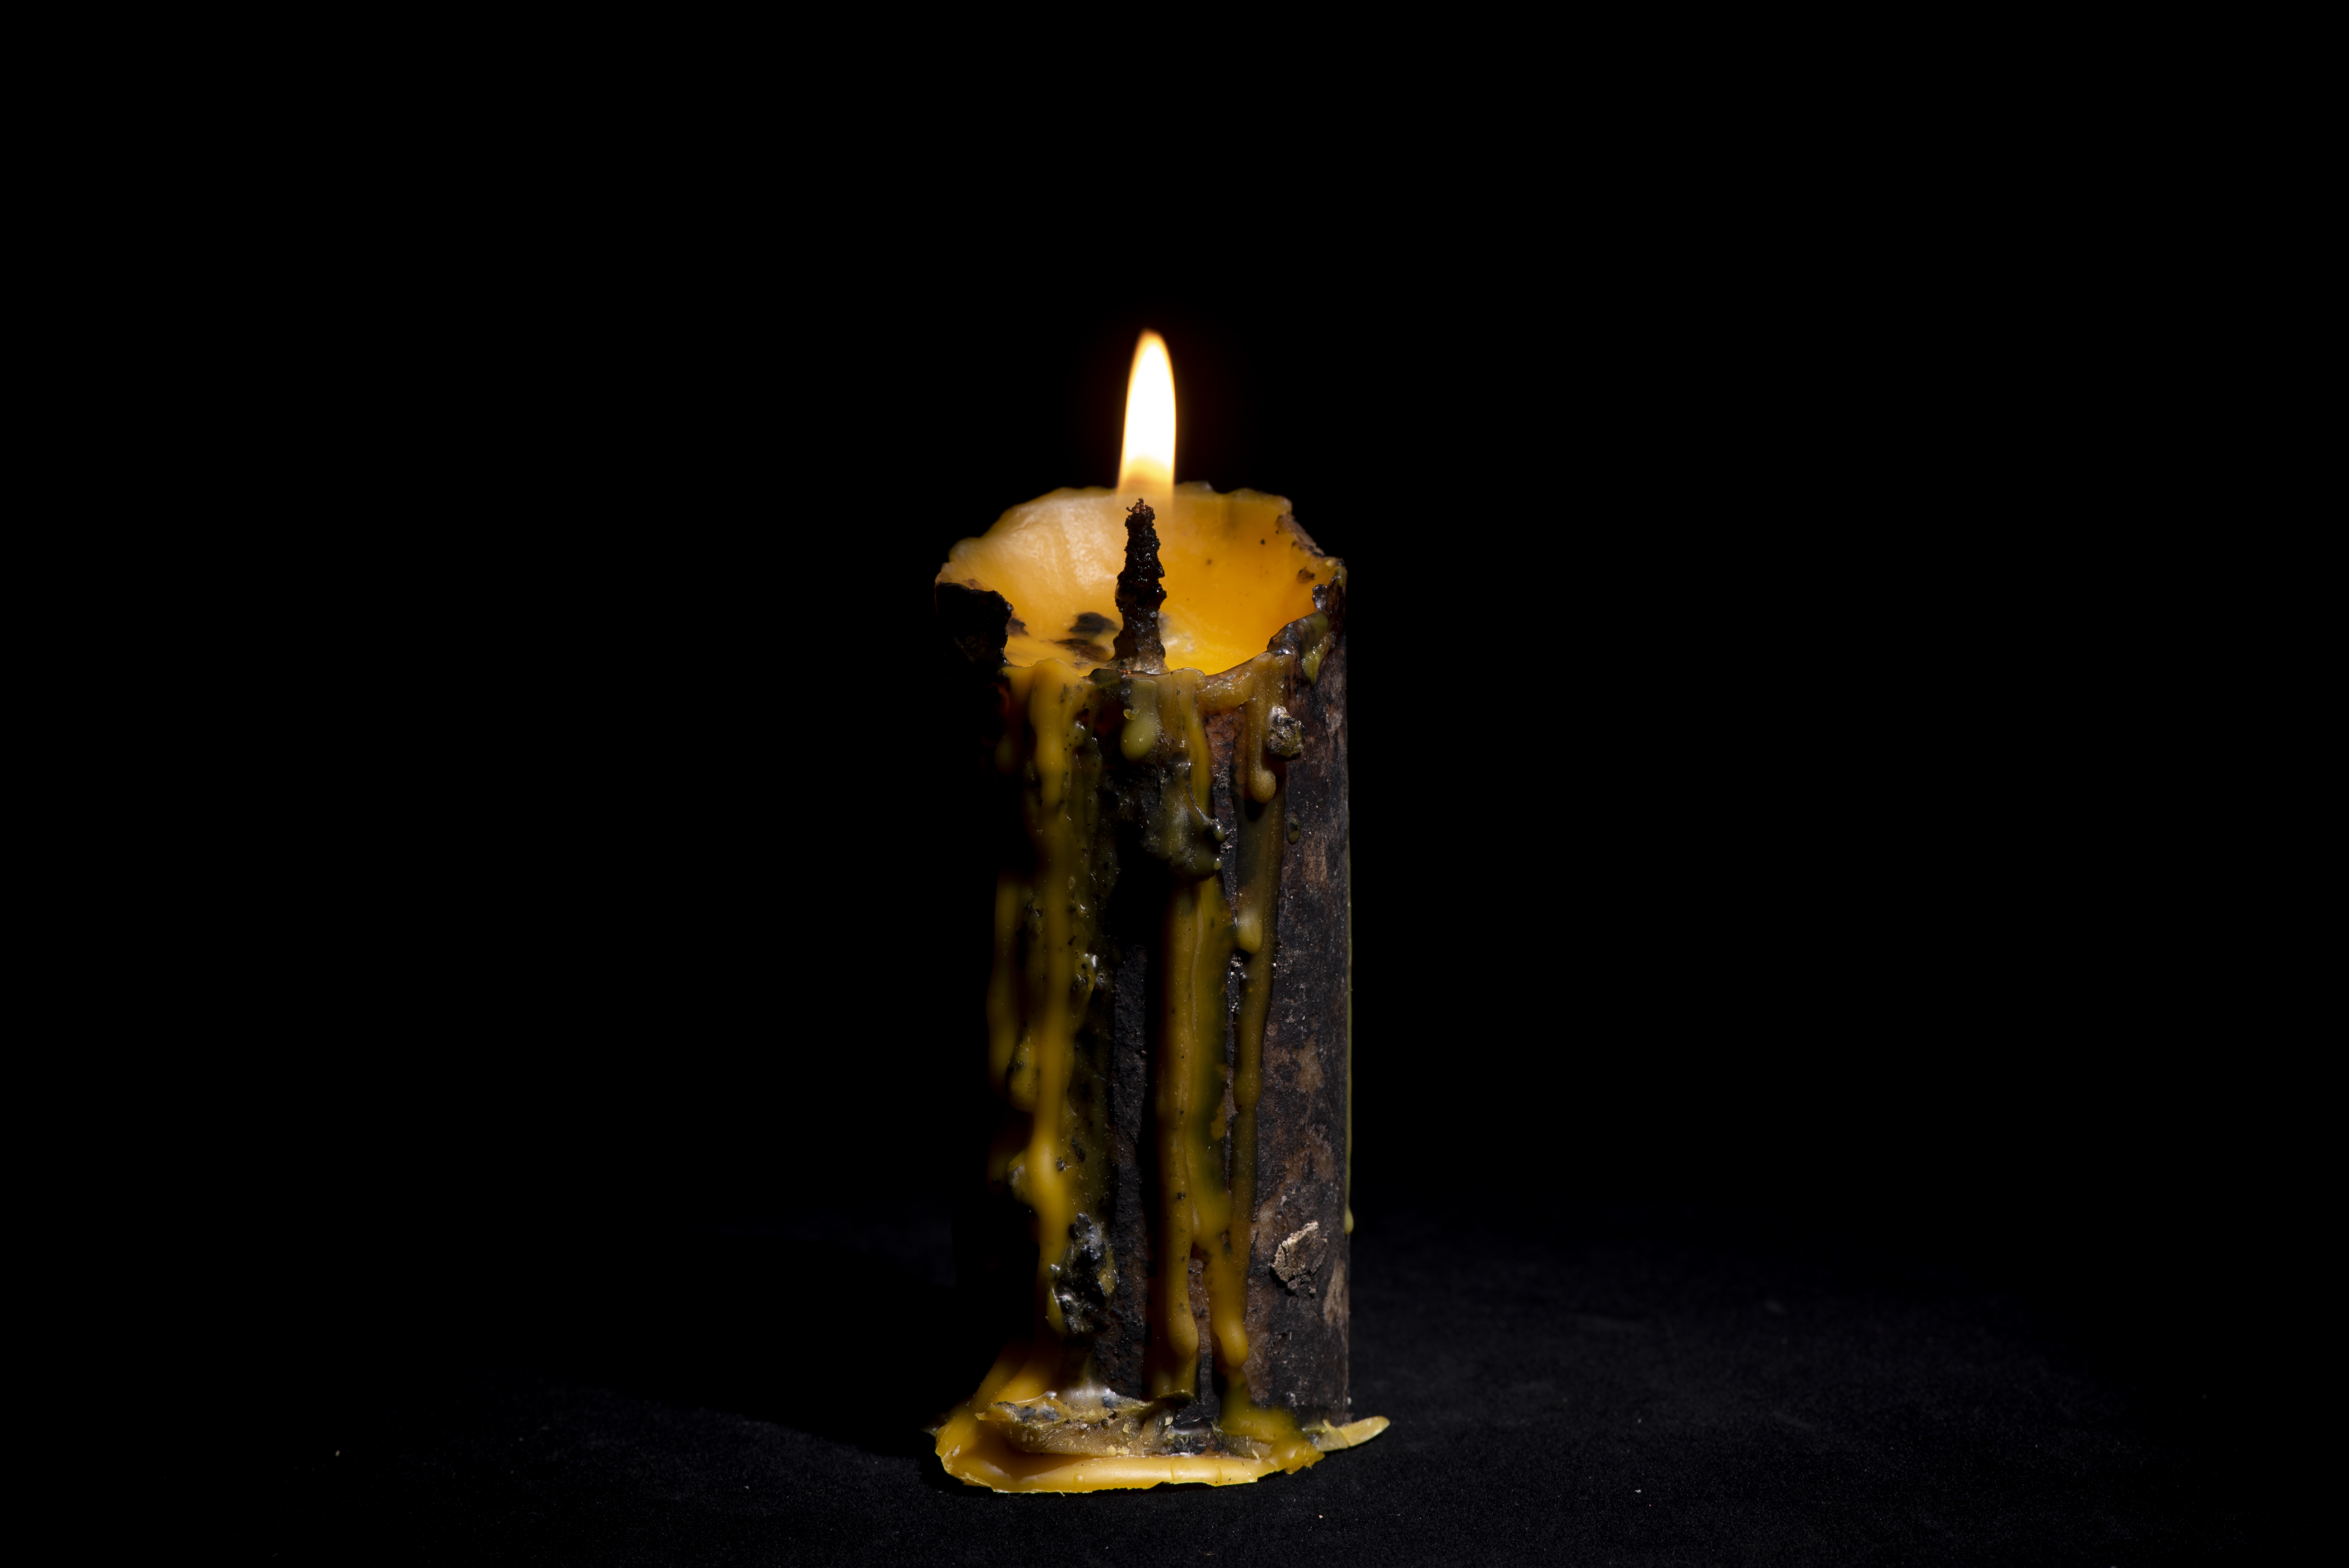 A Spooky Candle